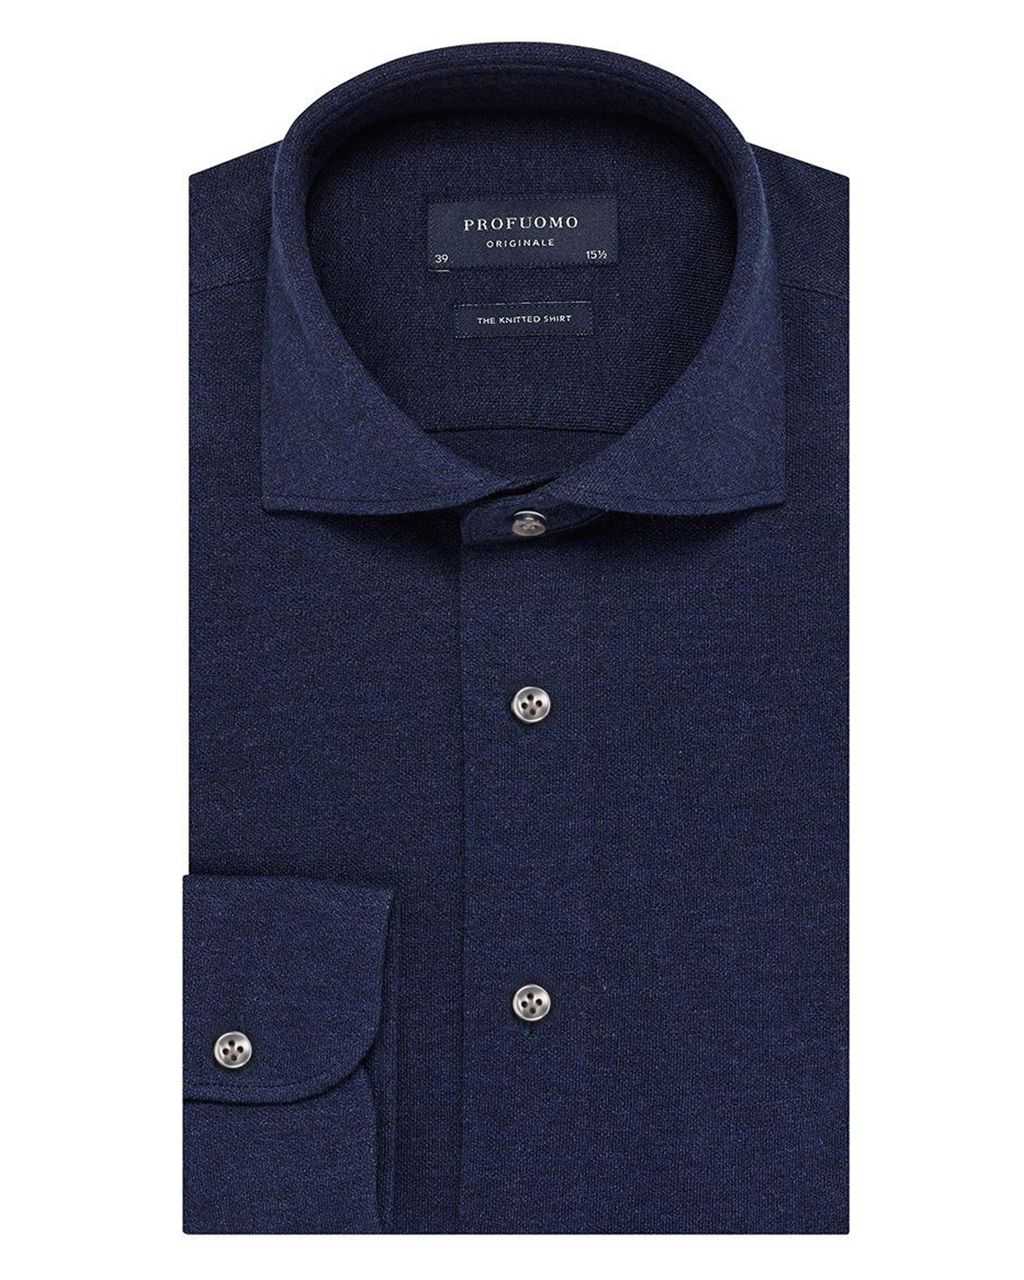 Profuomo Originale Slim fit Knitted Overhemd LM Donker blauw 031999-31-37